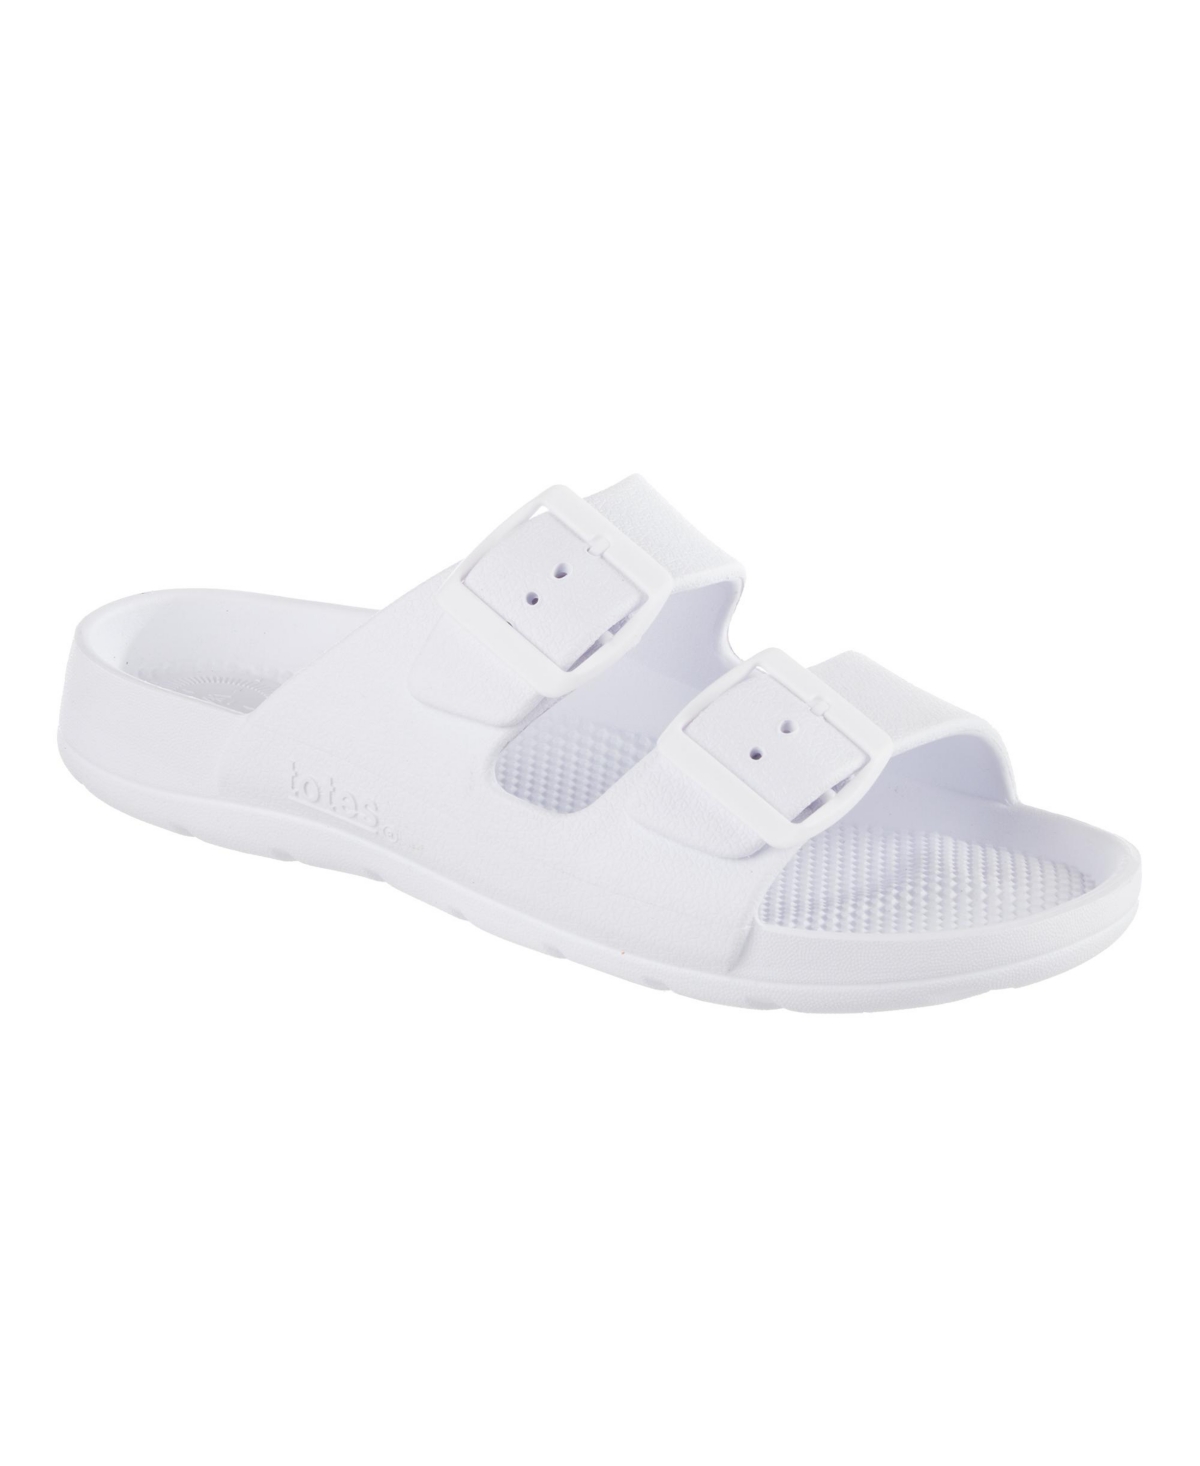 Totes Women's Double Buckle Adjustable Slide With Everywear In White